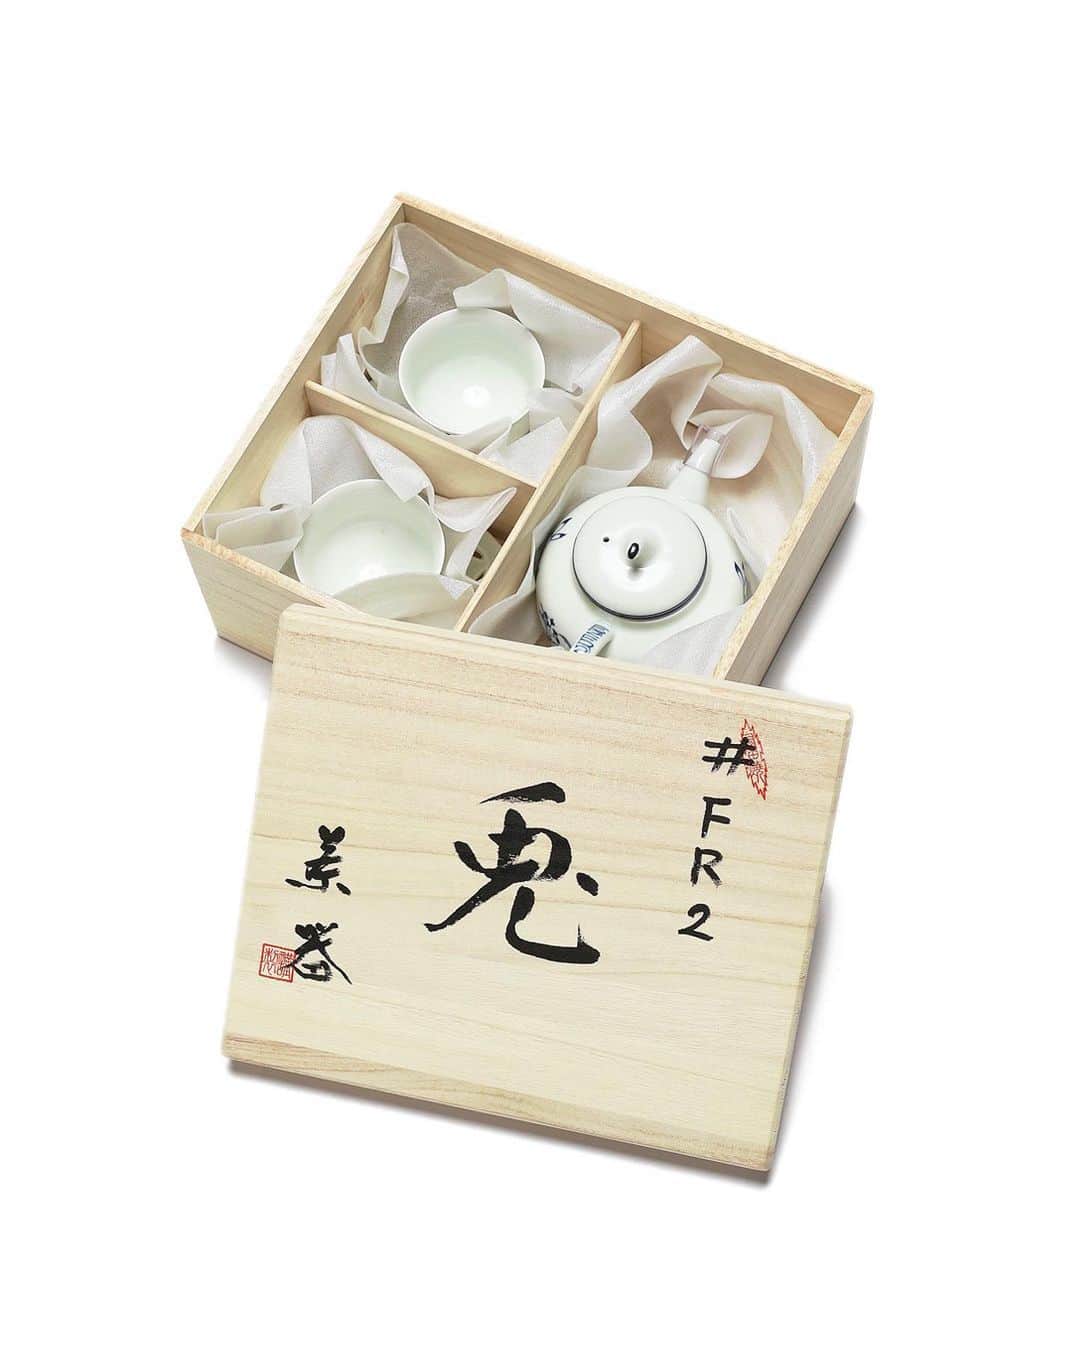 #FR2さんのインスタグラム写真 - (#FR2Instagram)「#FR2 X Tea Set CHIAKI  Let's Take A Breather  Tea set depicting a rabbit at play, a character from the oldest Japanese manga“Choju Jinbutsu Giga” (Scrolls of Frolicking Animals). This heartwarming tea set decorated with #FR2 ’s rabbit is now available.  This brand logo, inspired by “Choju Jinbutsu Giga”, is an illustration of #FR2 ’s playful mood. We combined it with the unique colours used in Arita porcelain to create this endearing design.  While the tea cup shapes itself in your hand, making tea even more enjoyable,the saucer adds a taste of elegance. The saucer is engraved with cloisonné hexagonal patterns “Kissho”symbolising good omens as your destiny branches out in all directions.  Take some time to appreciate the soft shapes of this delightful teapot and cup set as it warms you up during tea break.  #FR2 ×茶器CHIAKI ほっと一息。  日本最古の漫画「鳥獣人物戯画」に登場するウサギの遊戯を描いた茶器。#FR2 のうさぎが描かれた心温まる茶器セットが完成しました。  ブランドロゴが鳥獣人物戯画になった#FR2 らしい遊び心溢れる図案が入り有田焼ならではの色使いで心温まるデザインに仕上がりました。手になじむ湯呑にはお茶を一段とお愉しみいただけるように受皿でより品よく。受皿には“七宝”の“吉祥文様”が彫られ、ご縁が四方八方・十字に広がる縁起の良さも兼ね備えました。  柔らかいフォルムの急須と湯呑で温かい時間をお過ごしください。  #FR2 X 茶具 CHIAKI  歇口氣，小憩一下  茶具描繪的是日本最古老漫畫《鳥獸人物戲畫》中的嬉戲白兔一角。這套飾以#FR2 白兔的暖心茶具現正供應中。  受到《鳥獸人物戲畫》啟發的品牌標誌呈現出#FR2 的趣味精神。結合有田燒所用的獨特配色，我們終得創造出這款討喜設計。  合手的杯型配上增添優雅韻味的茶托，品茗時刻也更為愉悅享受。茶托上還刻有景泰藍六角花紋的「吉祥花」，象徵著吉祥如意，如同向四面八方開枝散葉的好運道。  請在暖心的茶憩時光，花點時間欣賞這套賞心悅目的茶壺和杯具組，感受一下它的柔和造型。  #FR2 ×茶具CHIAKI  尽享轻松片刻。  这套茶具描绘的是在日本最古老的漫画《鸟兽人物戏画》中出现的白兔嬉戏的画面。 #FR2 的白兔嬉戏图温馨茶具套件顺利完成。  品牌标识含有鸟兽人物戏画，＃FR2 独具特色的图案情趣盎然以有田烧瓷器特有的配色构成温馨的设计。 合手的茶杯配上茶托，可以使用更精美的茶具更愉悦地品茶。茶托上雕刻着“七宝”的“吉祥花纹”，机缘向四面八方和十字扩展，也兼具吉祥如意的祝福。  请用形状柔和的茶壶和茶杯享受温馨的时光。  #FR2#fxxkingrabbits#頭狂色情兎#Smokingkills® #茶器#茶器セット#Chaki#greentea#teaset」1月7日 19時54分 - fxxkingrabbits